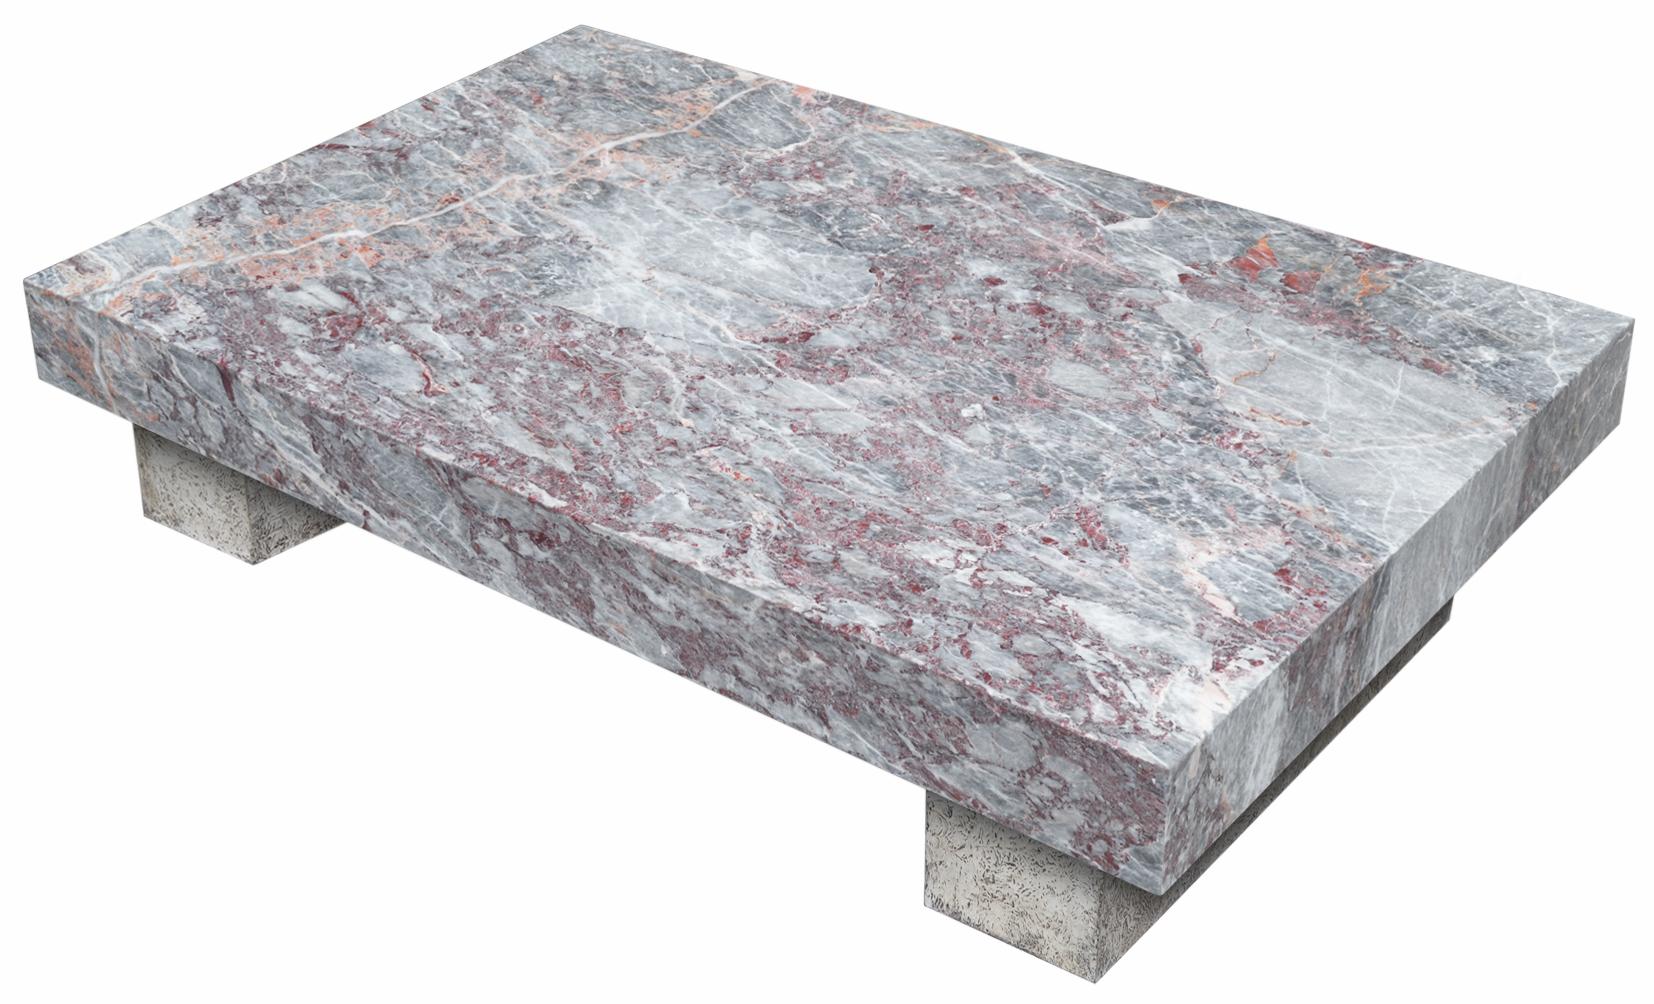 Modern coffee table with Grey Salomé marble top cm. Measures: 140 x 85 H. 32 - inches 55,12